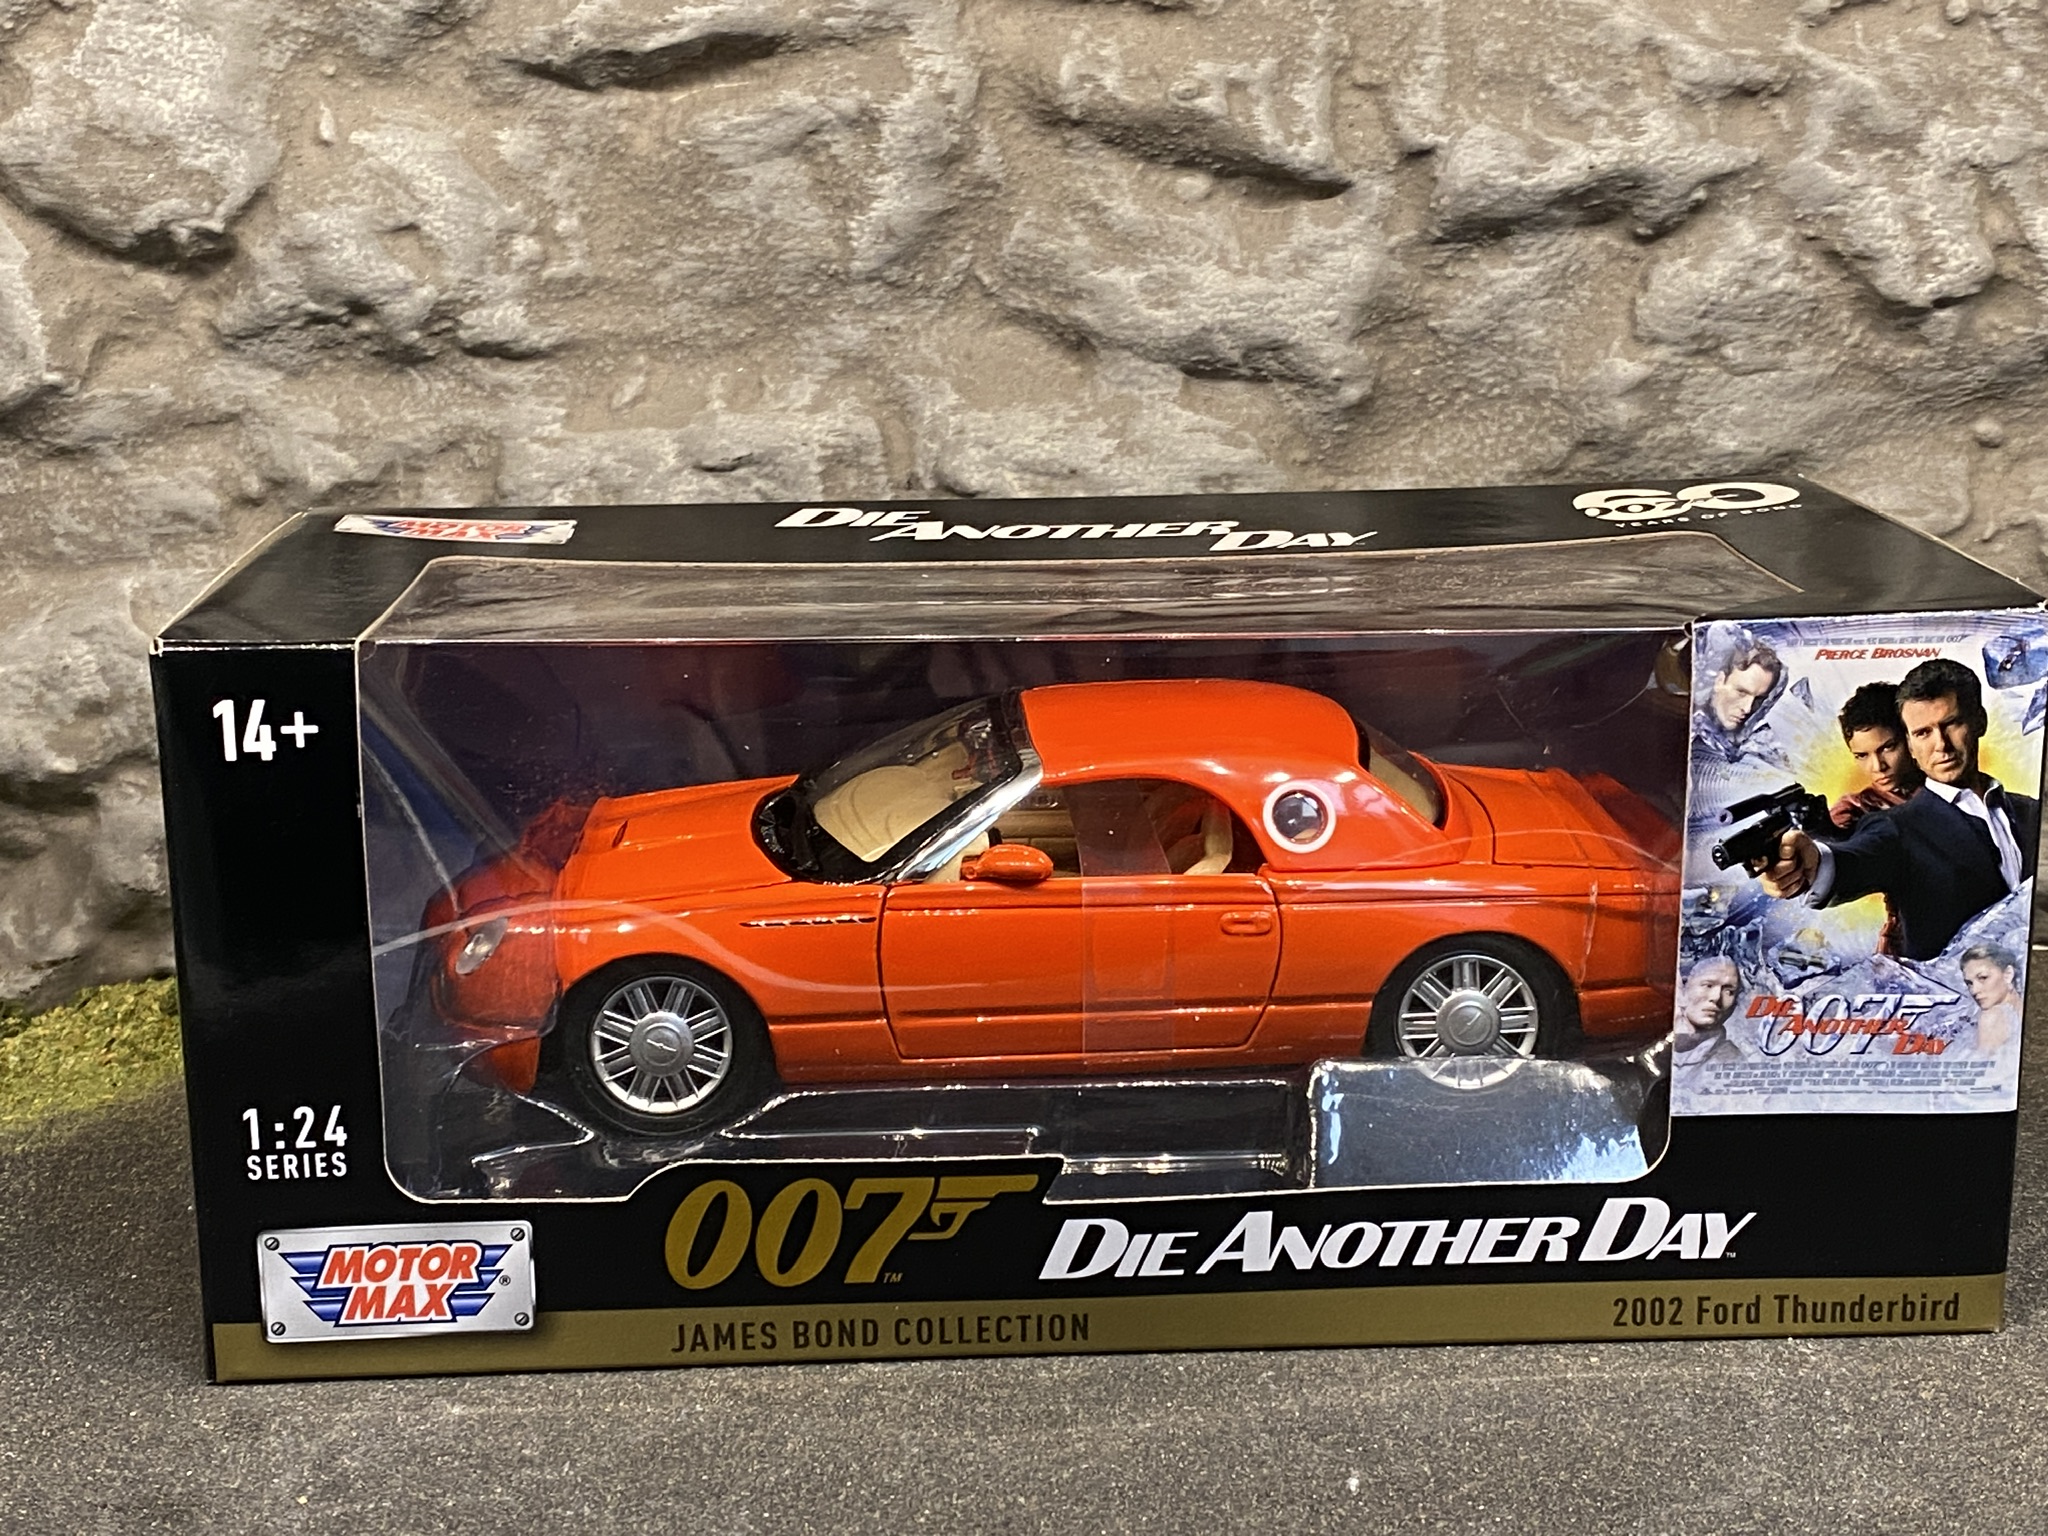 Skala 1/24 Ford Thunderbird 02', James Bond Collection, Die Another Day fr MotorMax